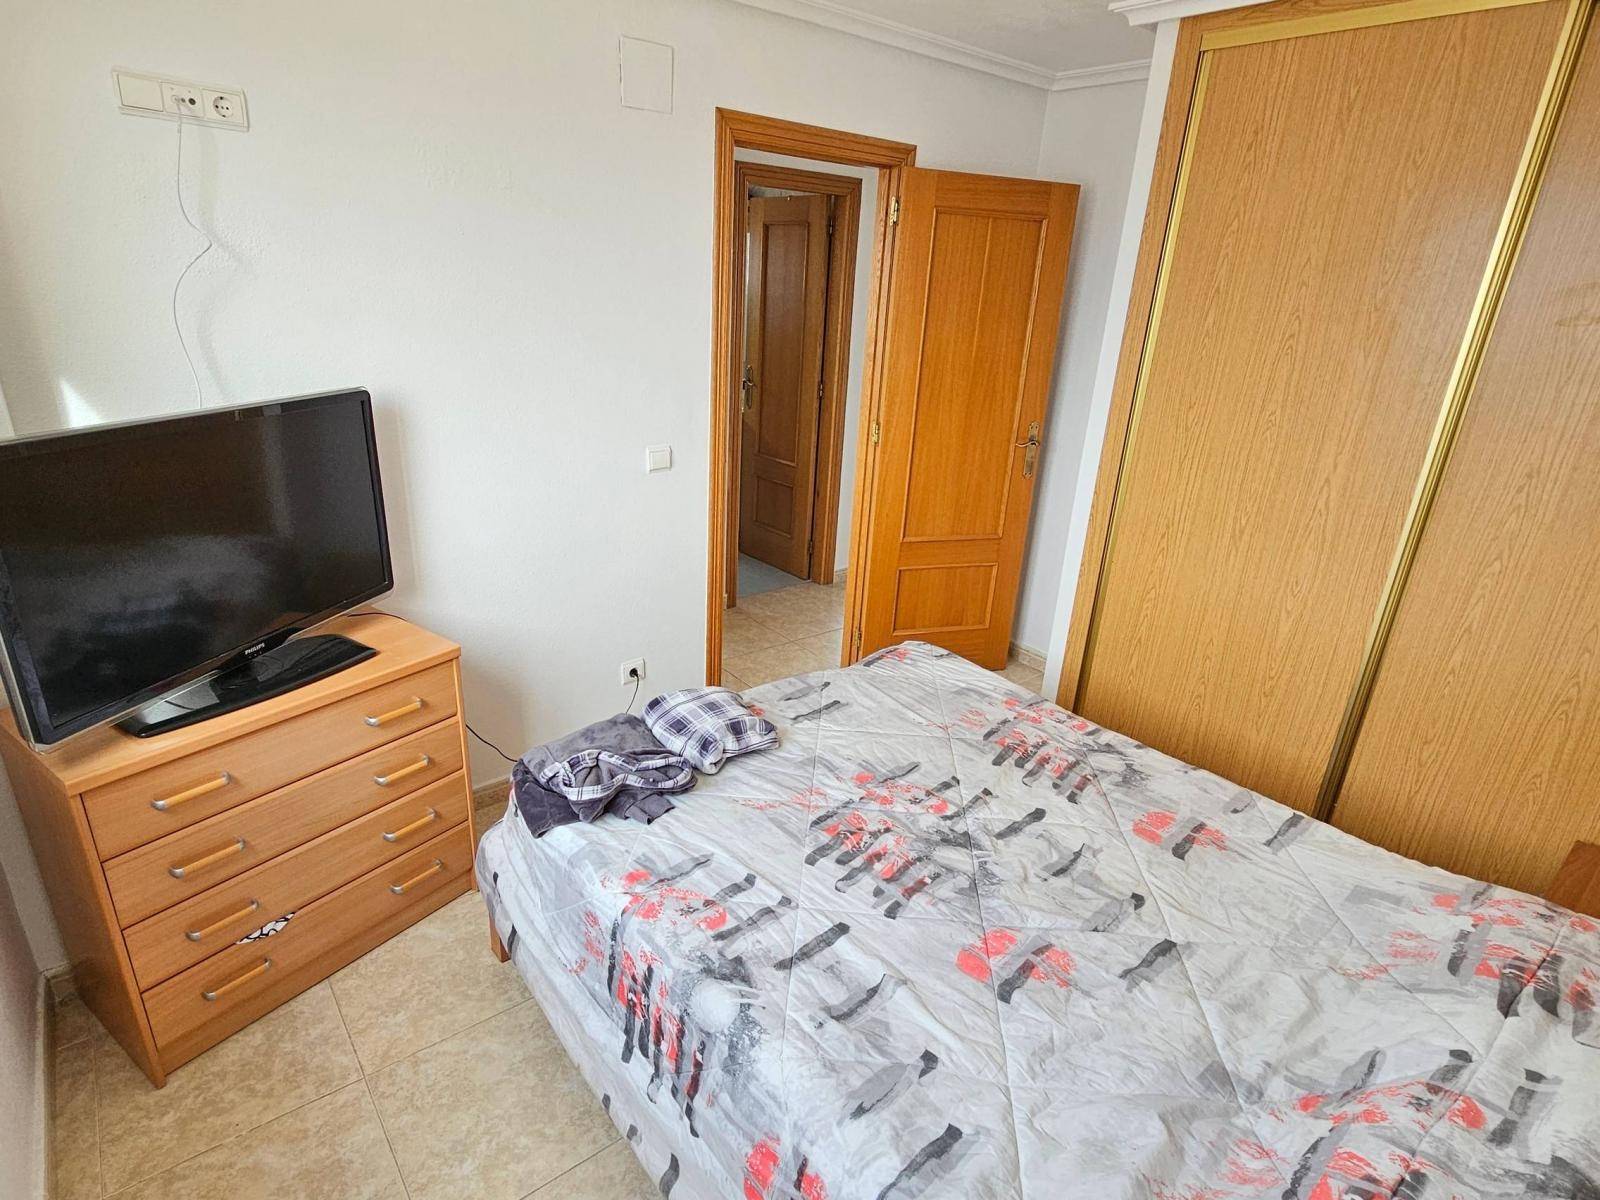 SPACIOUS APARTMENT WITH GARAGE JUST A STONE'S THROW FROM THE CENTRE